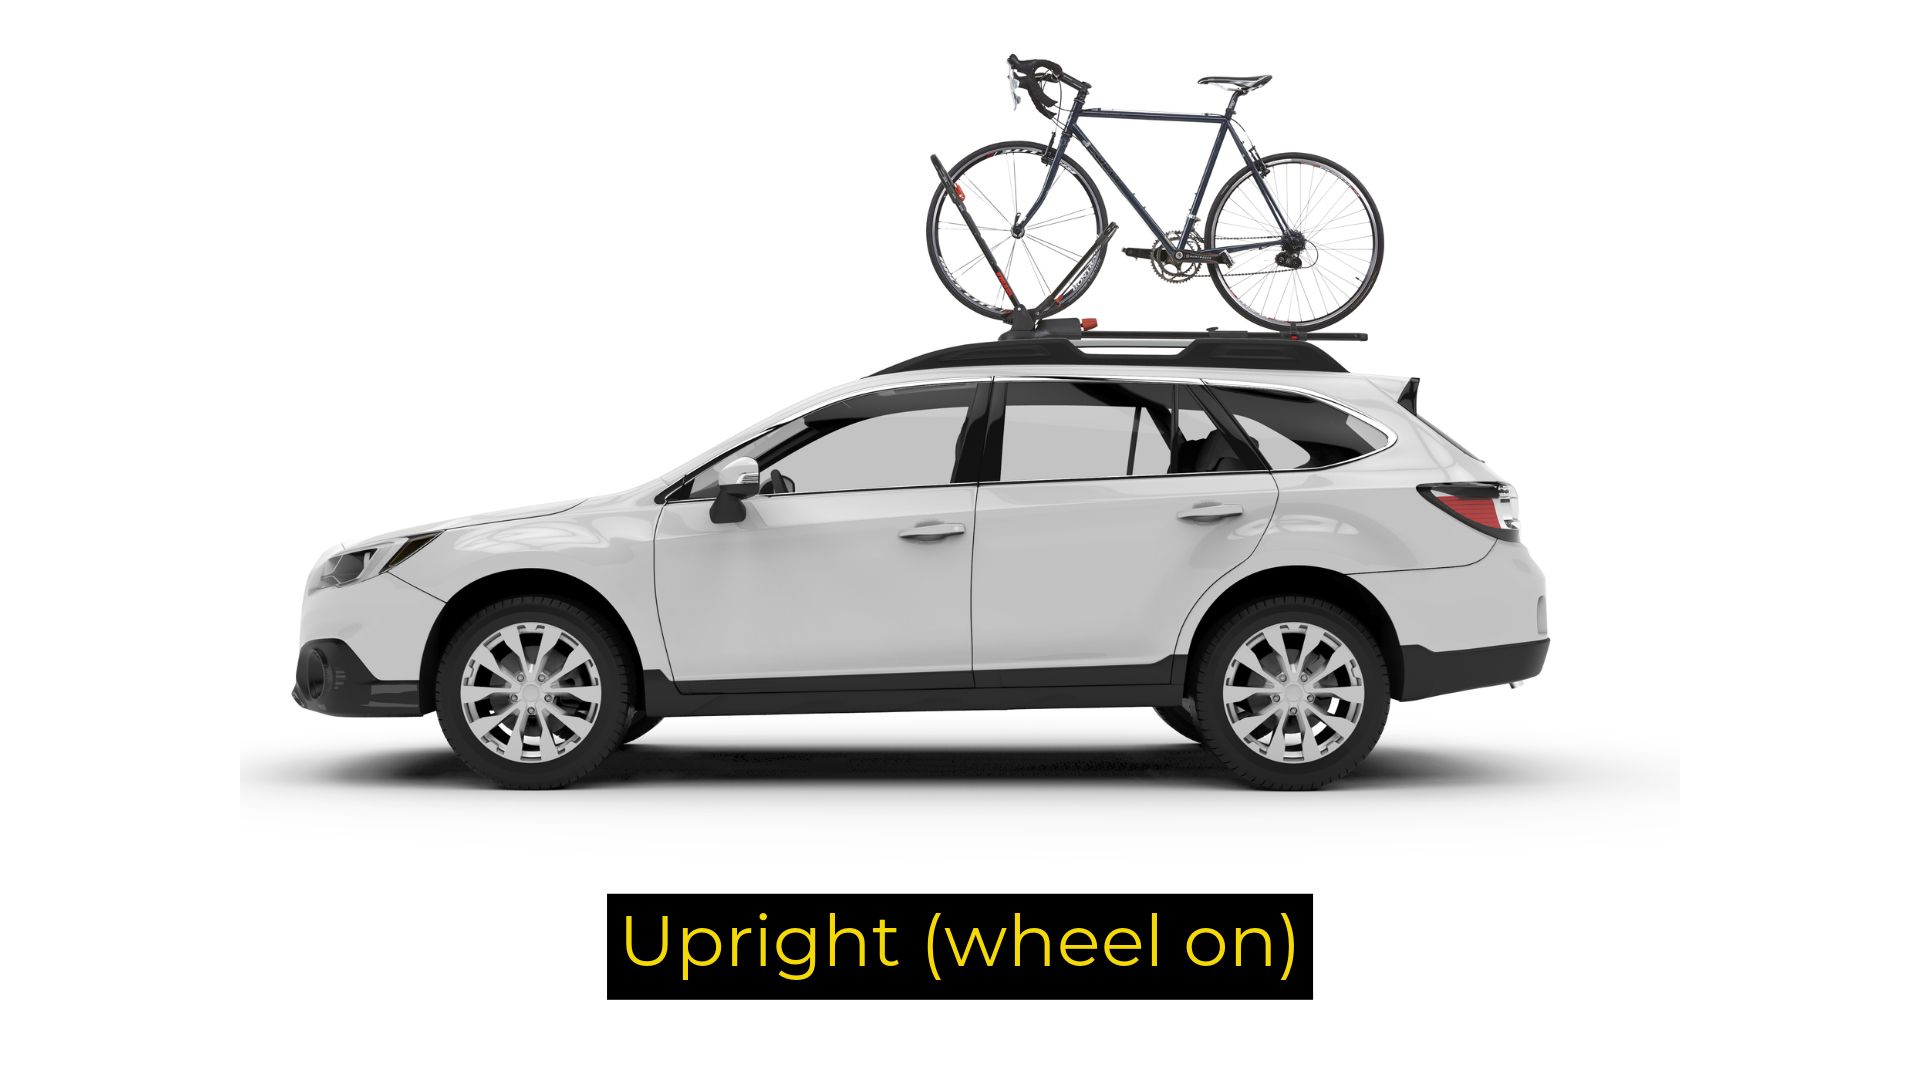 A car with an upright roof mount bike rack